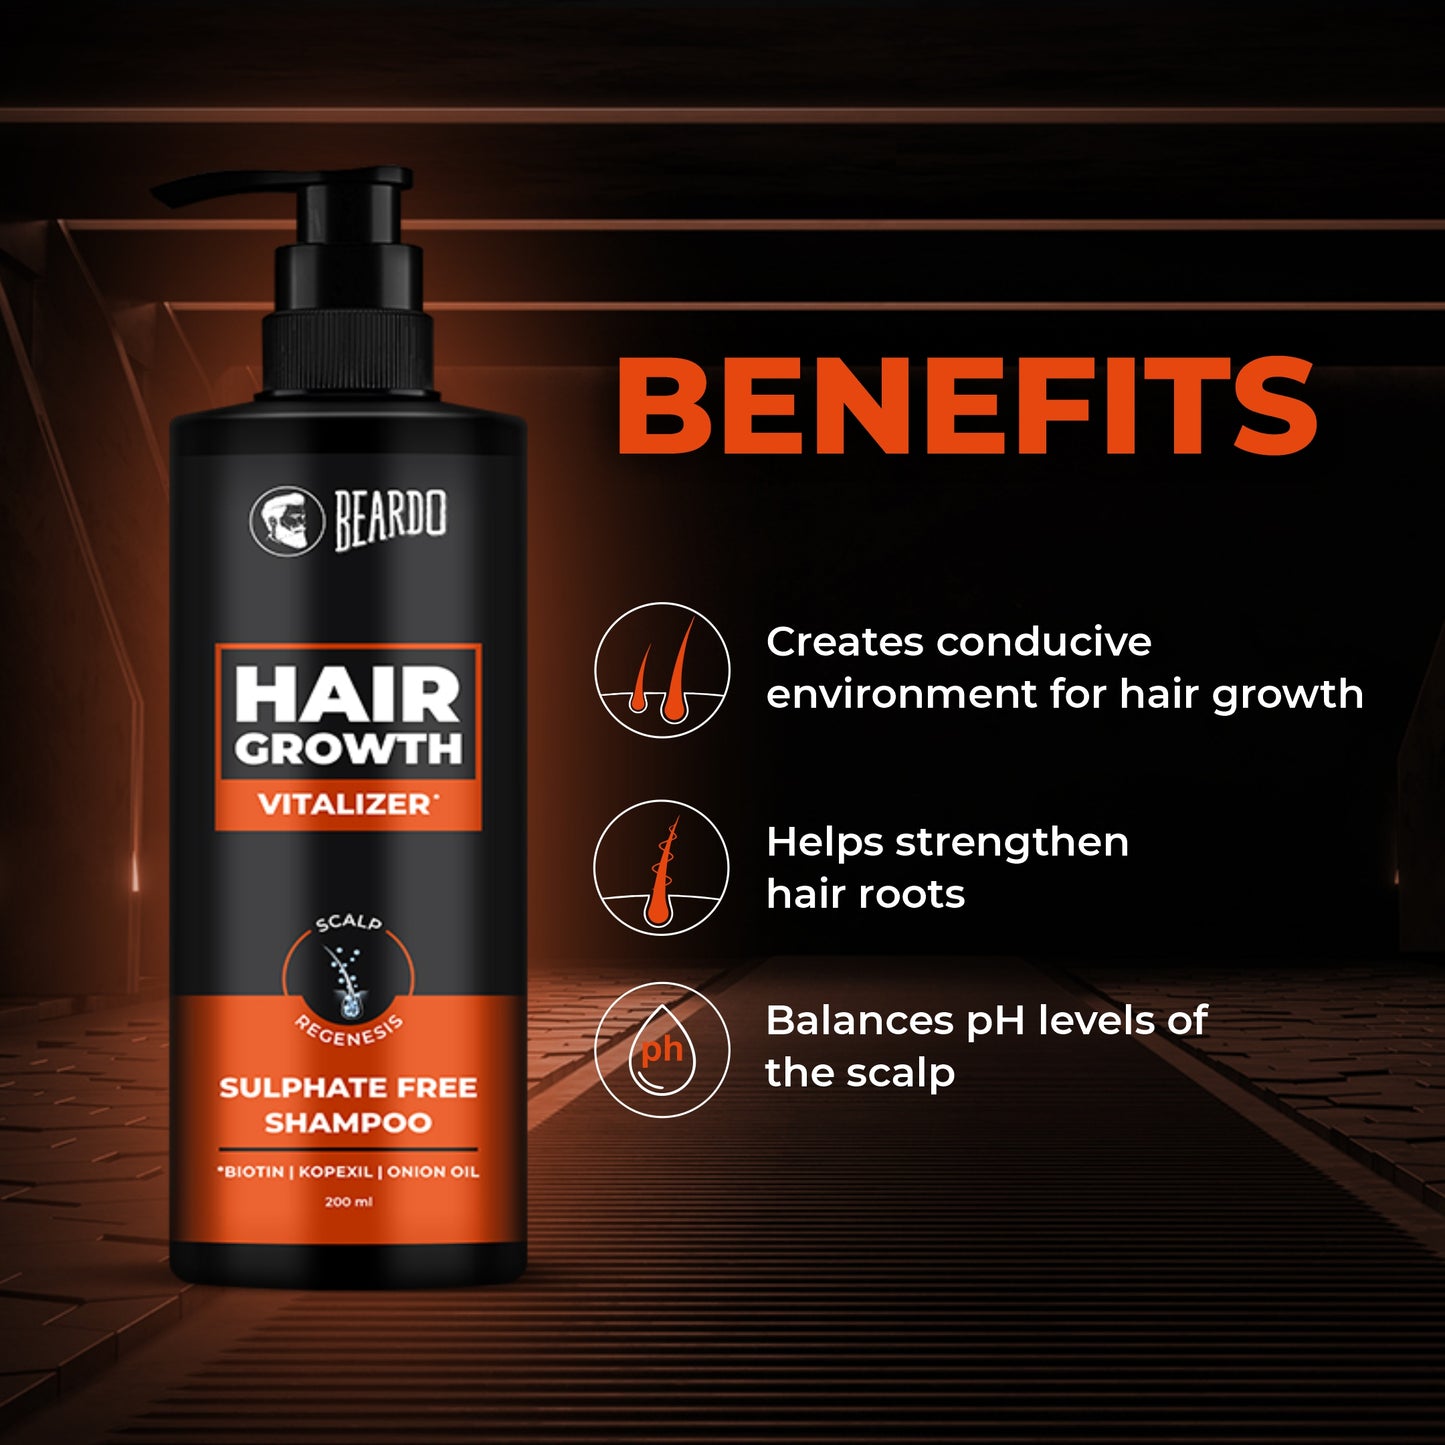 shampoo just for men, best shampoo for balding men, best male shampoo, best hair regrowth shampoo for men, healthiest shampoo for men, strengthen hair roots, balances pH levels of the scalp